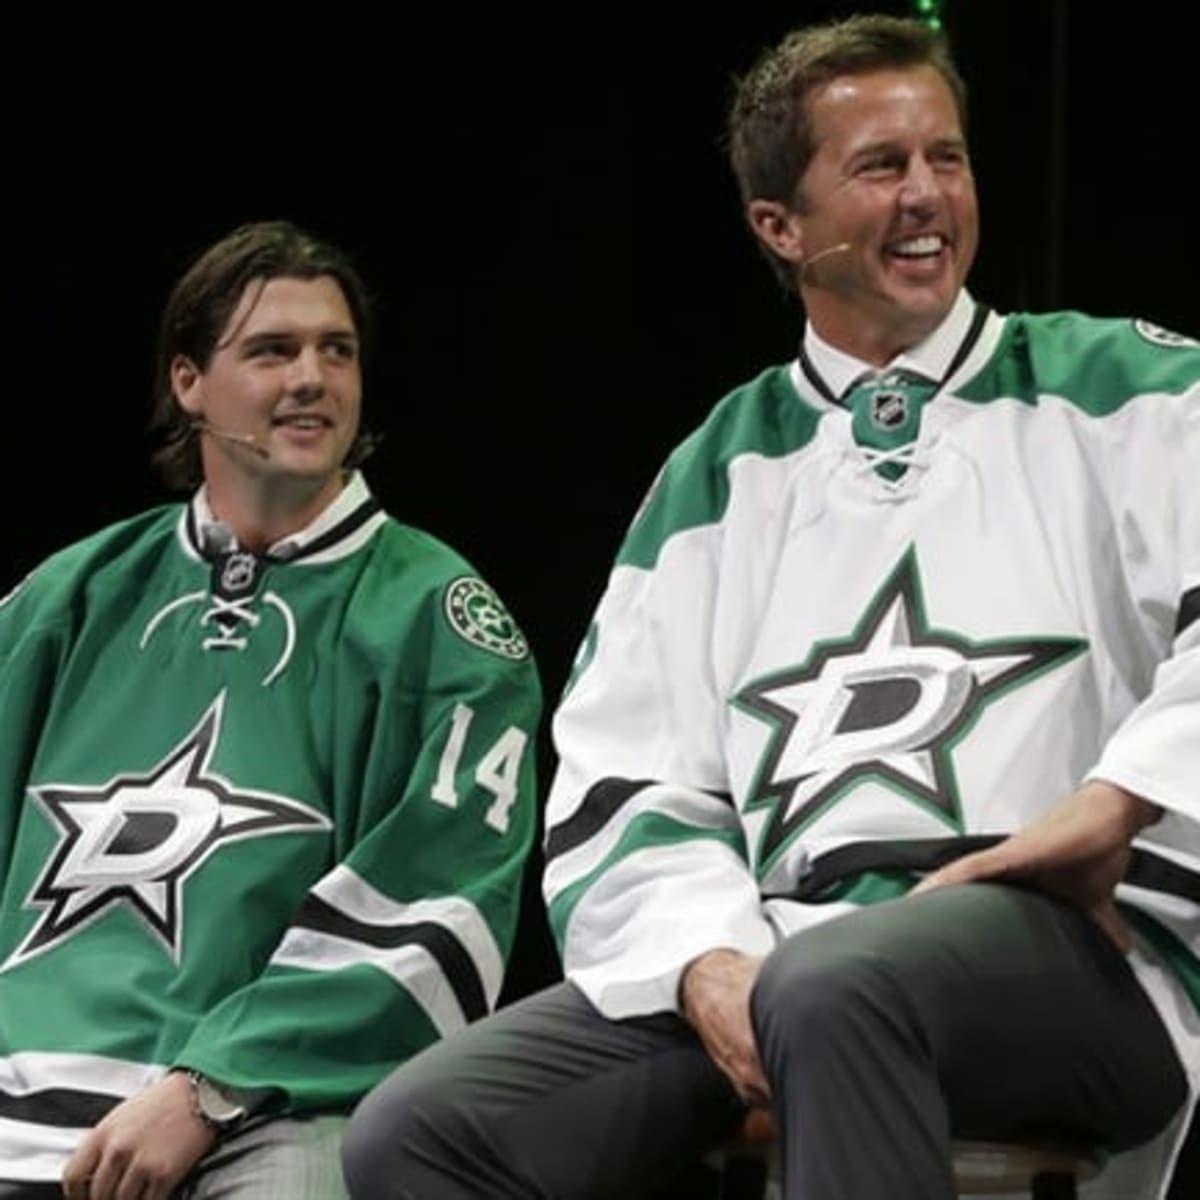 Dallas Stars Jersey Changes: Would Fans Welcome A New Color Scheme